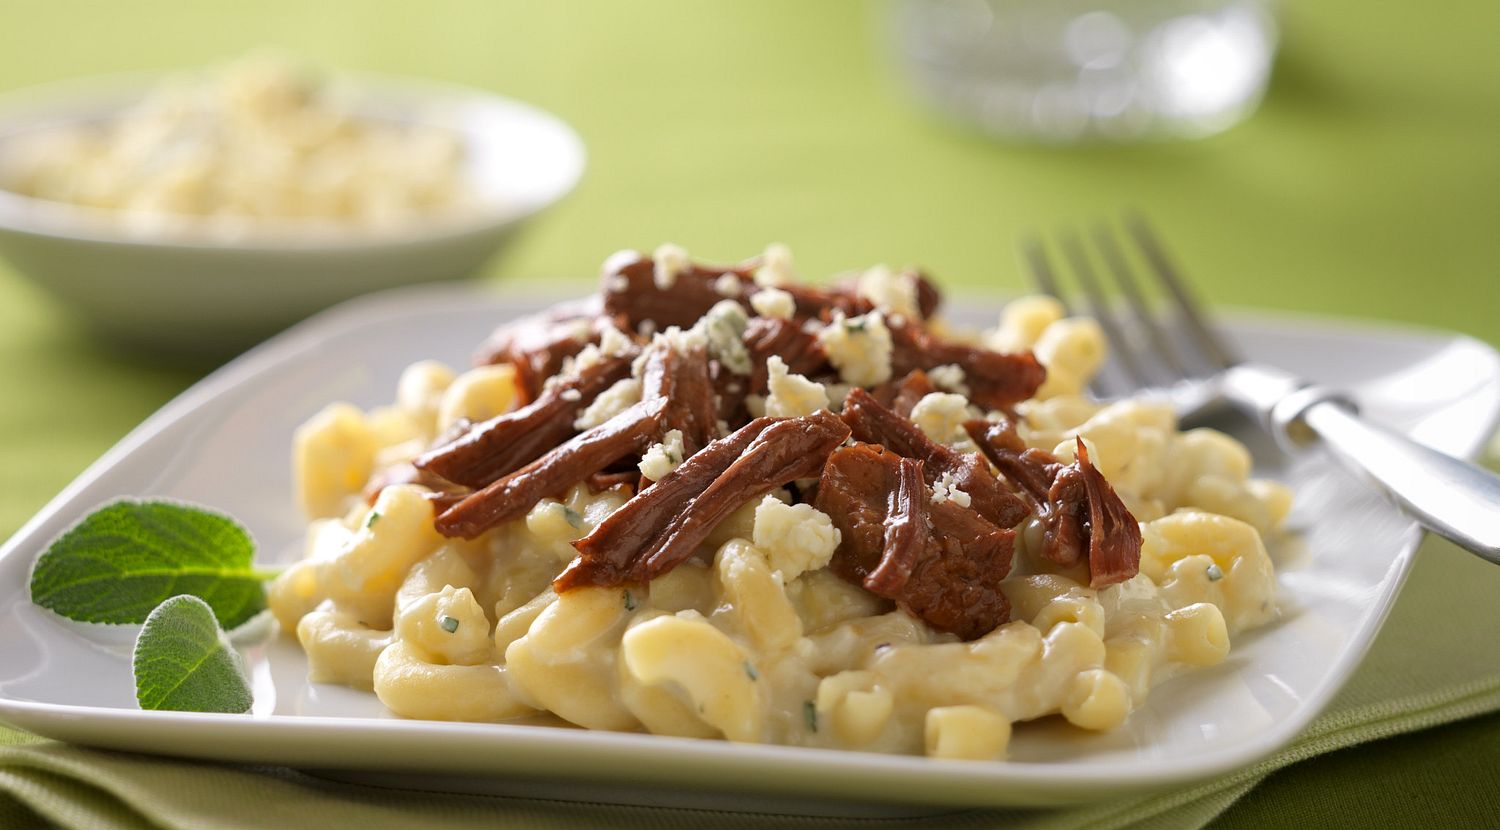 Beefed Up Mac & Cheese